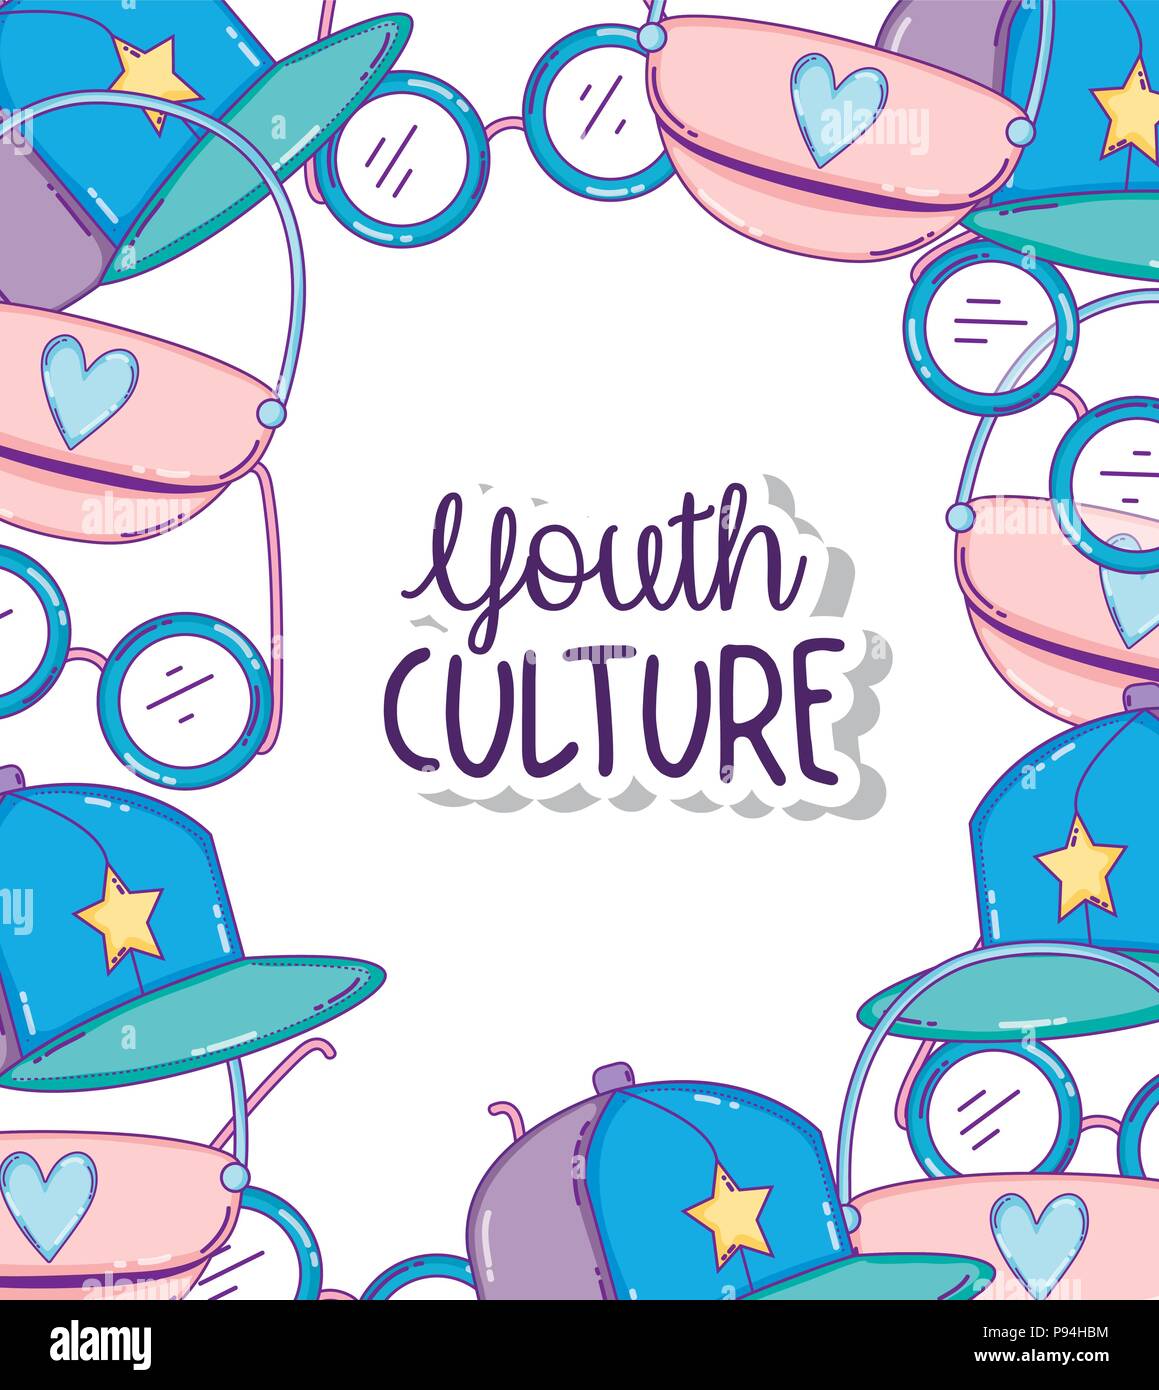 Youth culture cartoons Stock Vector